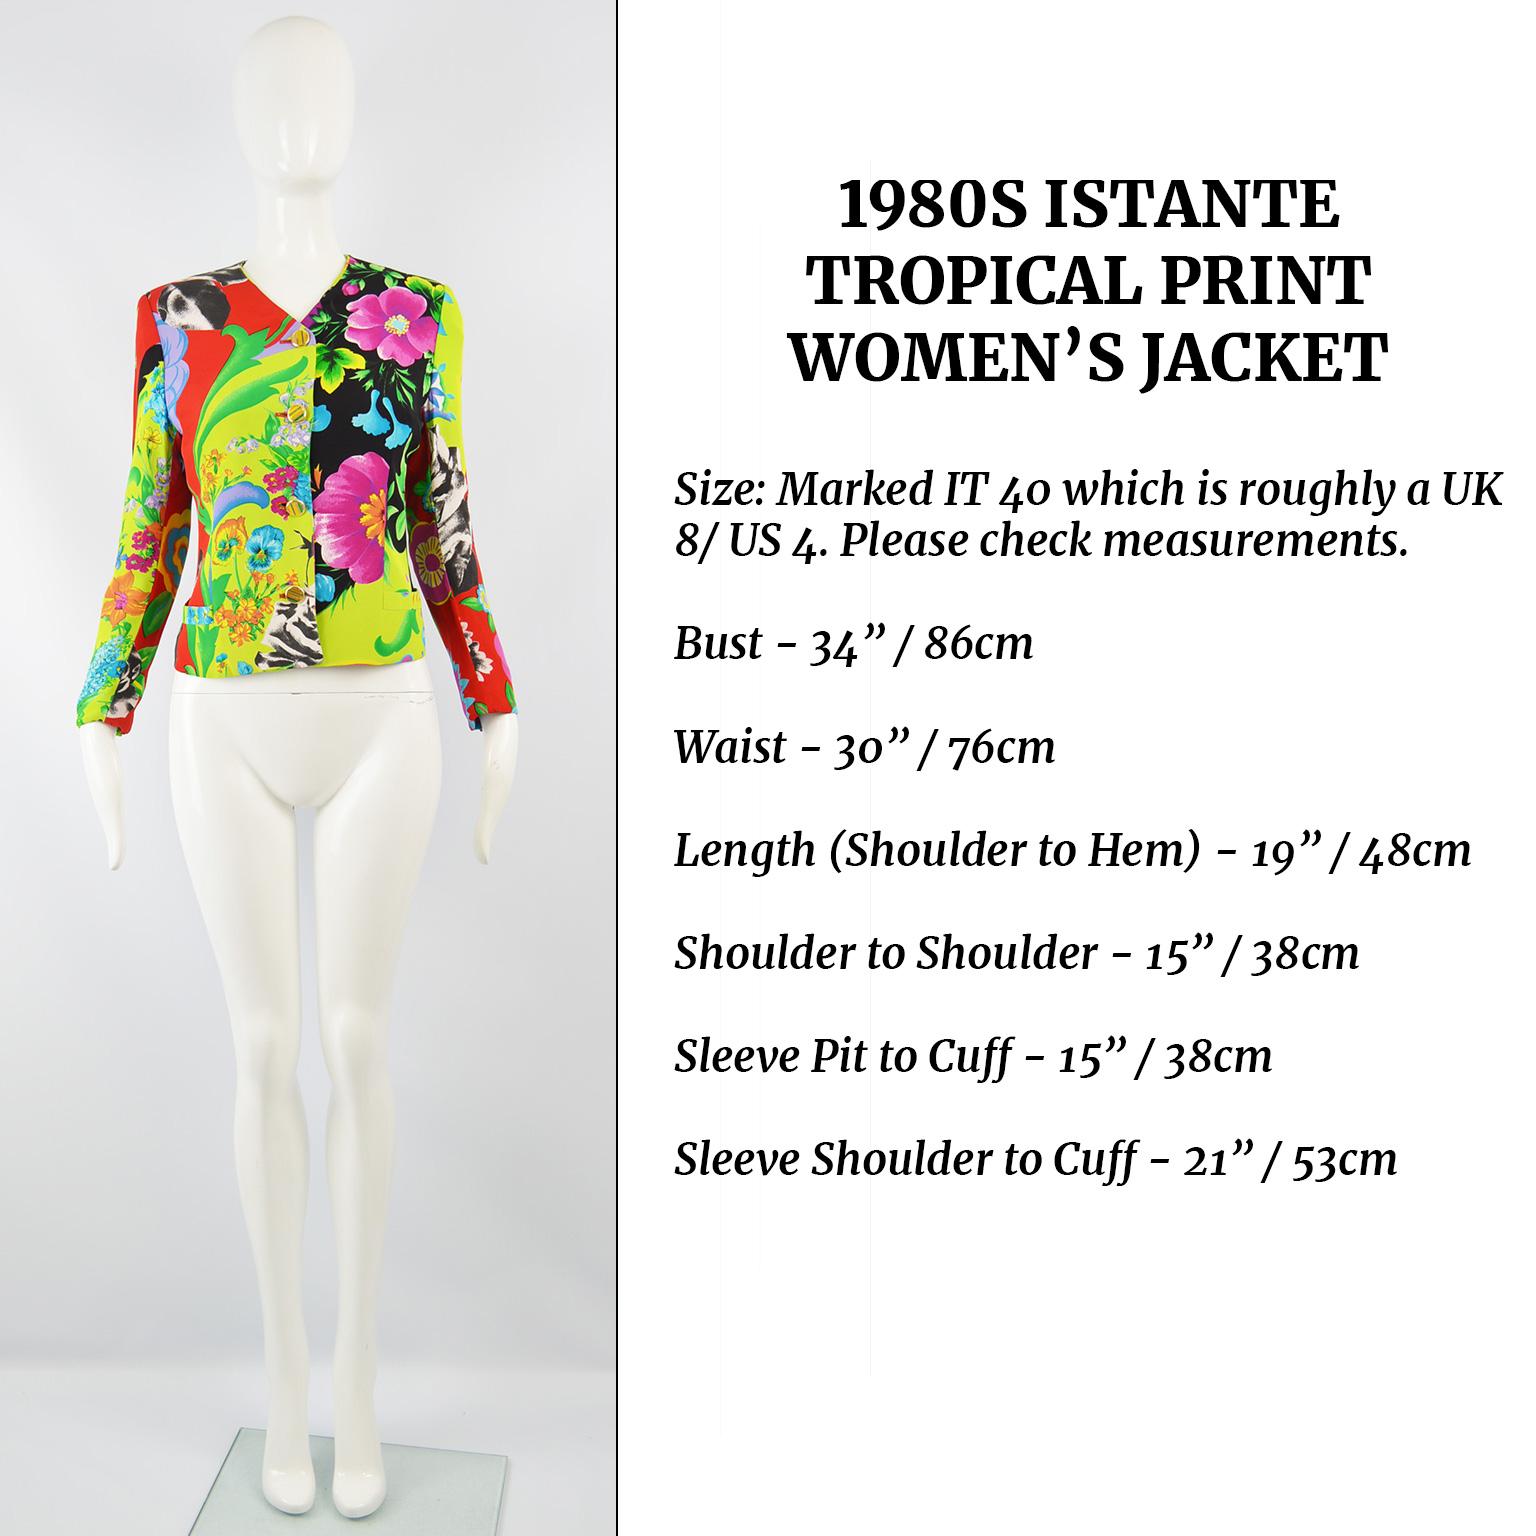 Istante by Gianni Versace Bright Tropical Print Women's Vintage Jacket, 1980s 6